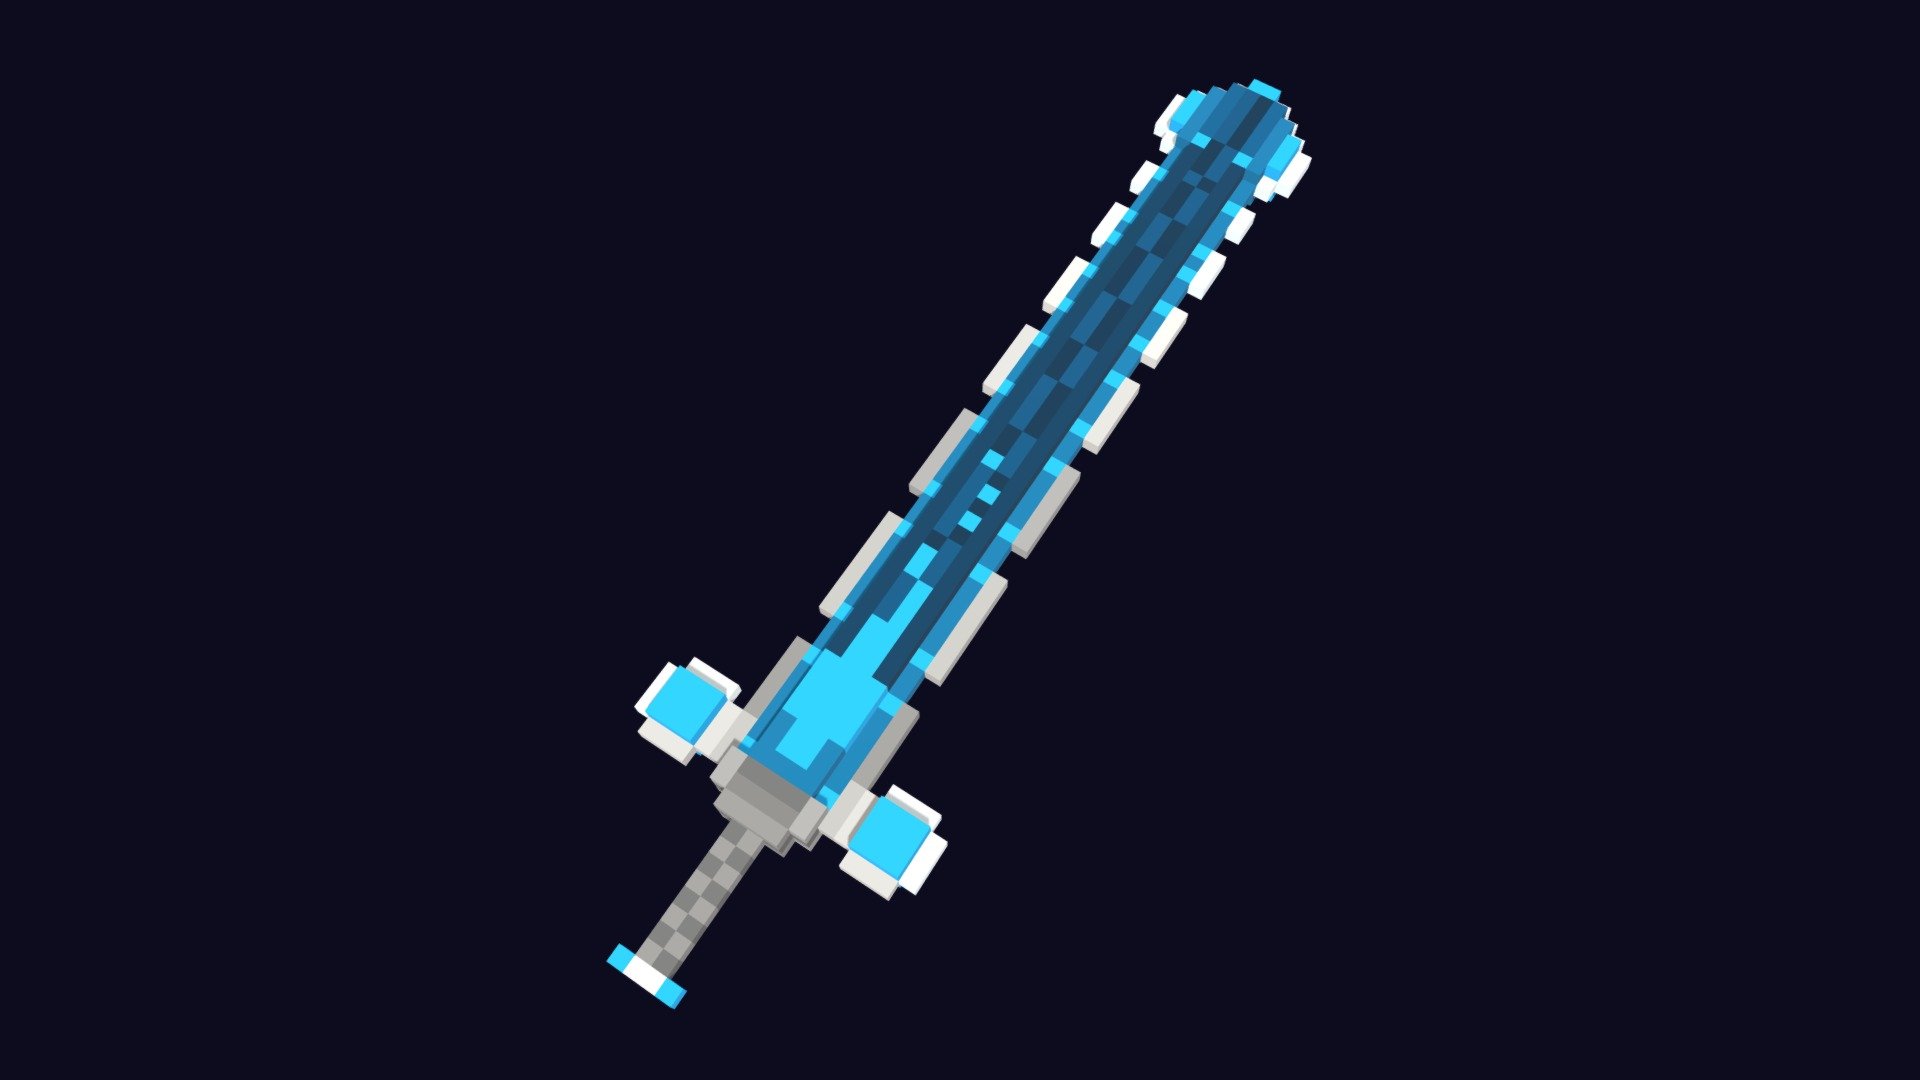 Voxel Sword 1

Check more voxel creations and explore the world of voxels like never before!

Coming new Voxel Weapons Pack ! - Voxel Sword 1 - 3D Lowpoly Weapons - Buy Royalty Free 3D model by MrMGames 3d model